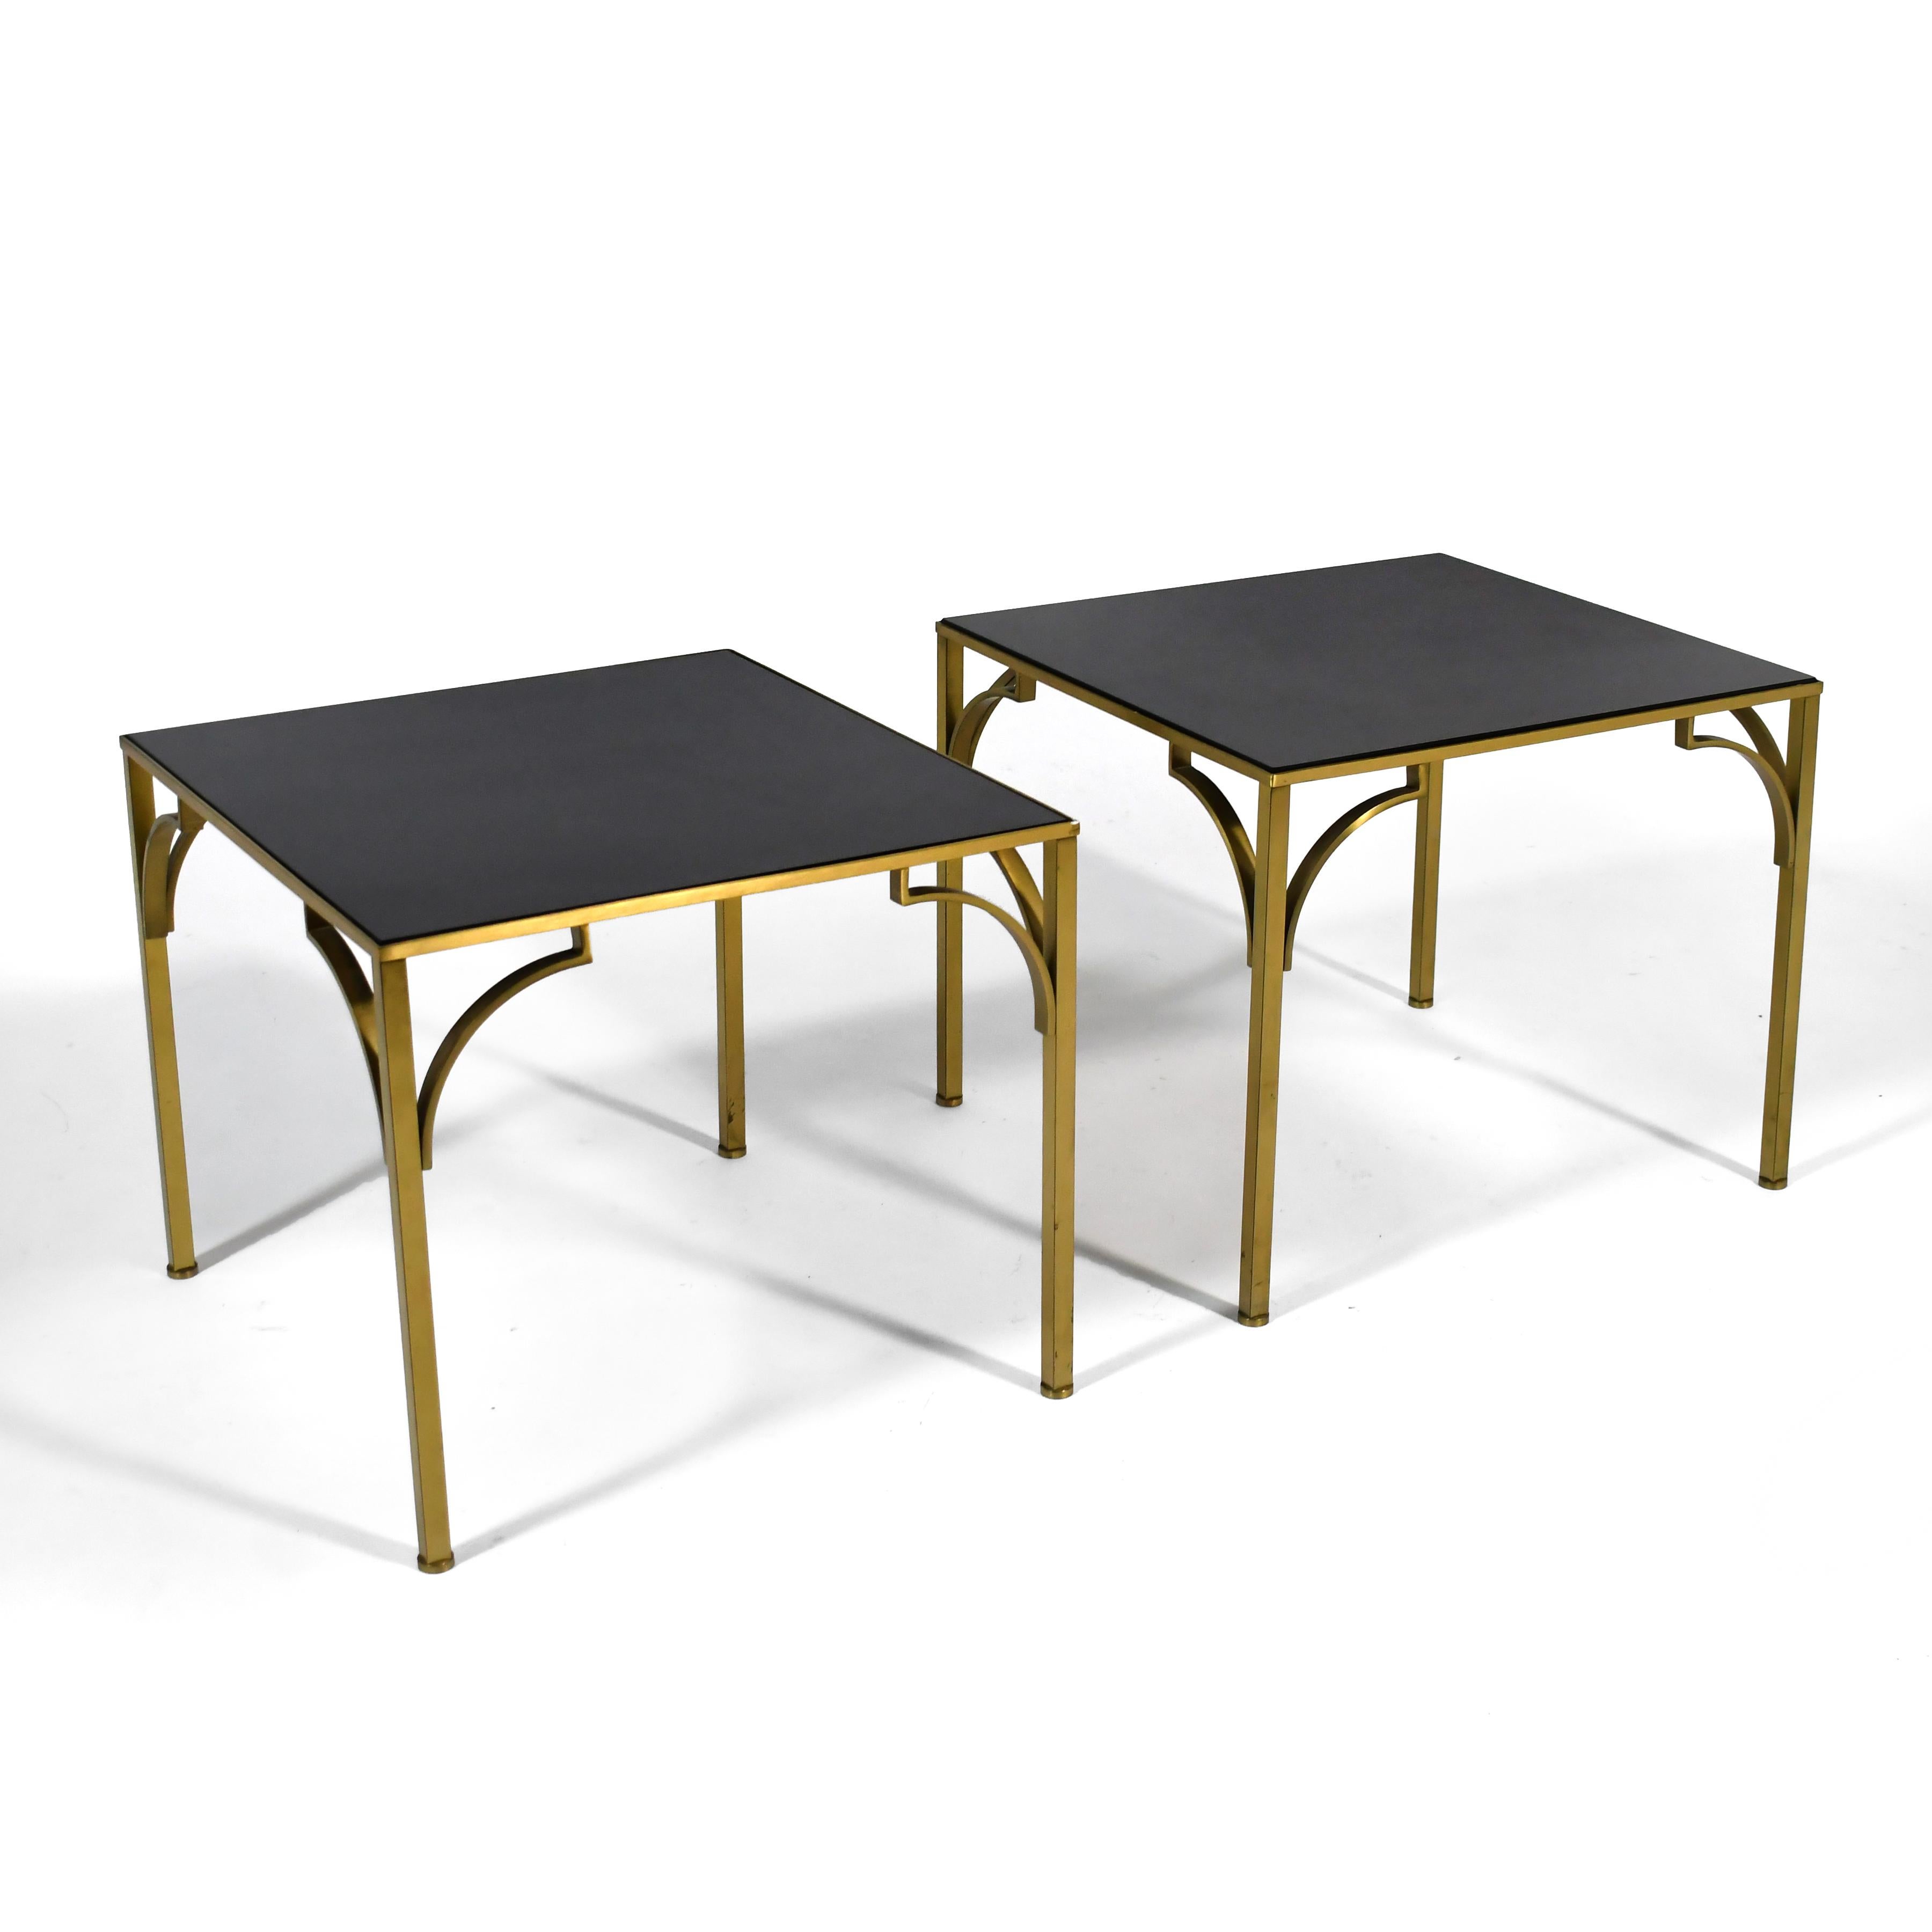 Pair of Brass Side Tables with Black Glass Tops In Good Condition For Sale In Highland, IN